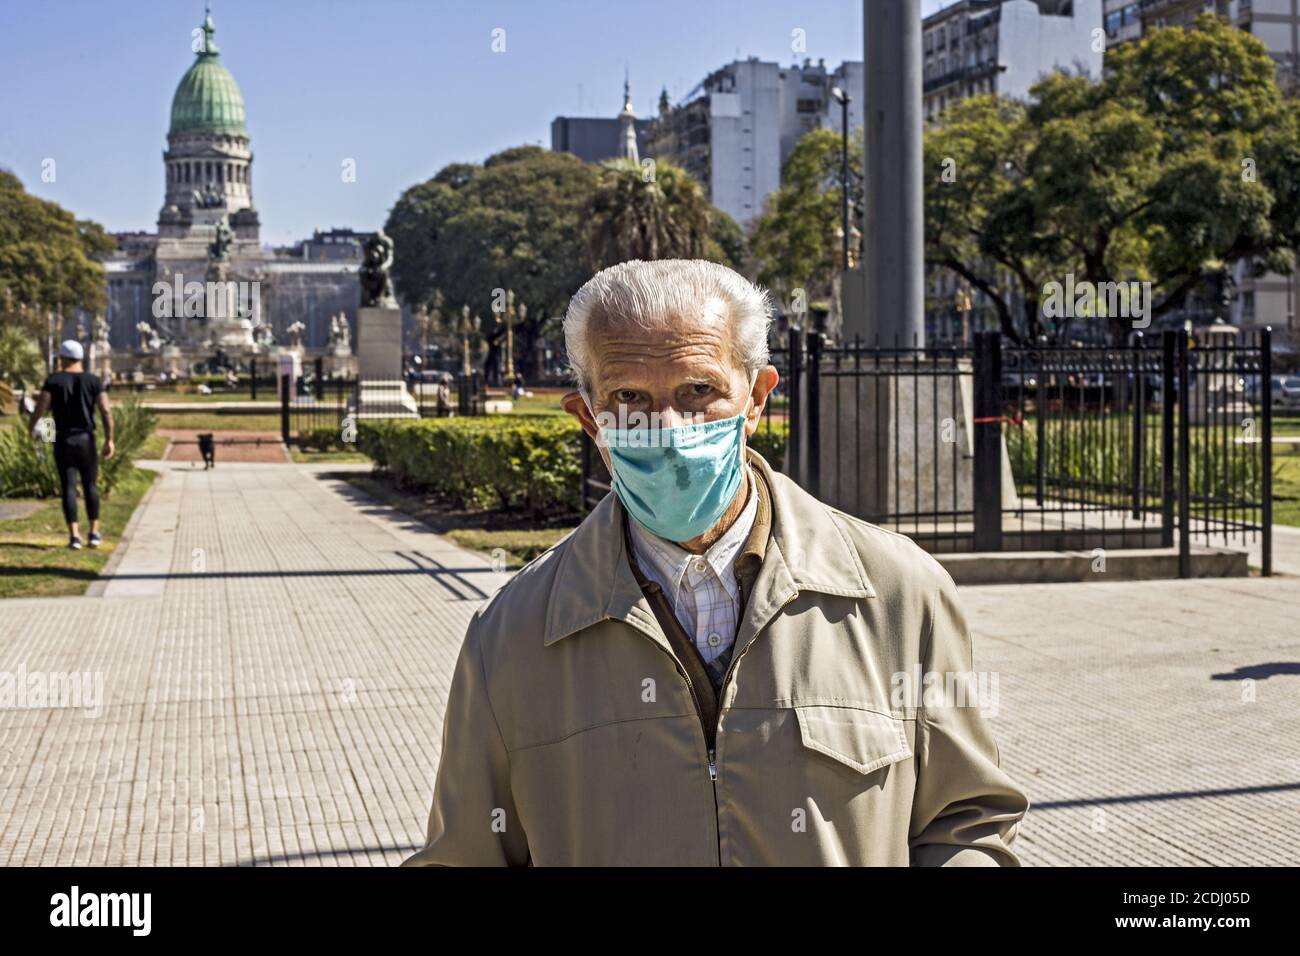 Buenos Aires, Federal Capital, Argentina. 27th Aug, 2020. After two days in a row with more than 10 thousand cases of people infected by Coronavirus, every 24 hours, the alarms came on again.At this time, President Alberto FernÃ¡ndez is meeting with the Governor of the City of Buenos Aires, Horacio RodrÃ-guez Larreta, and with the Governor of the Province of Buenos Aires, Axel Kicillof, to define how the tenth stage will continue, starting next Monday. of Preventive Isolation in the Capital City and the Conurbano.For the rest of the country, the president spoke on Thursday with 12 governors Stock Photo